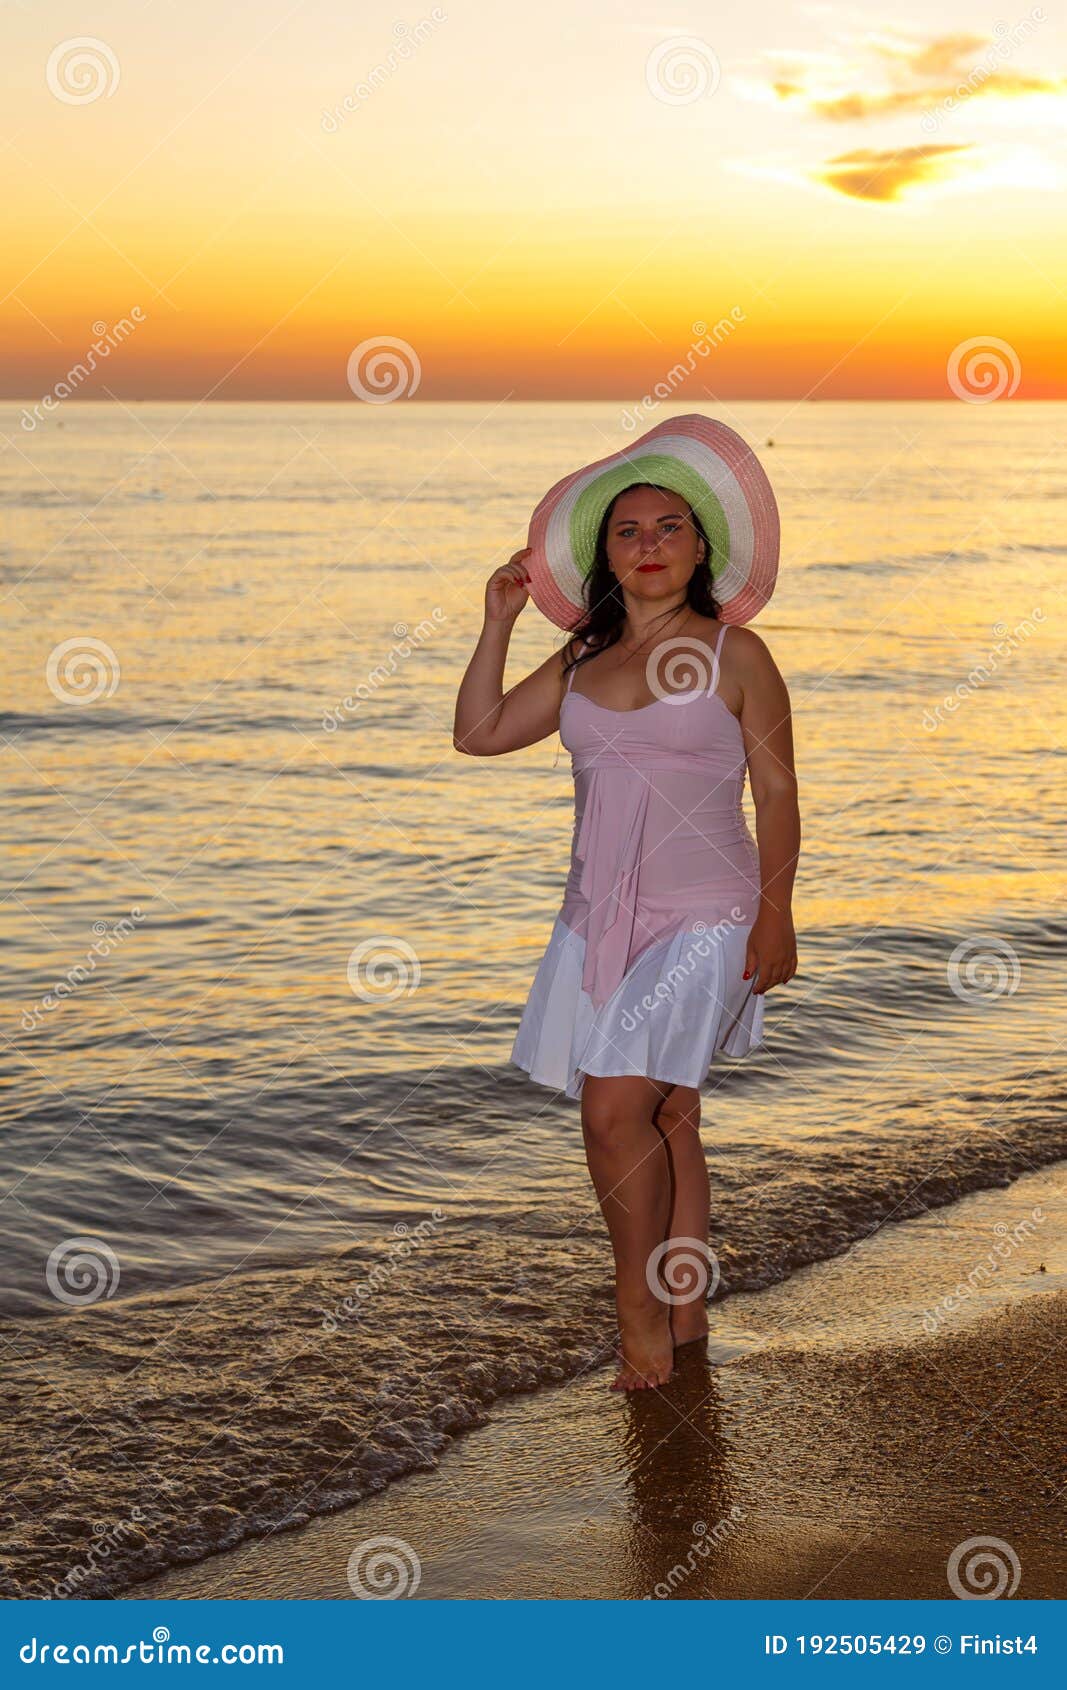 a jewish woman in a hat and white dress at sunset walks along the seashore.